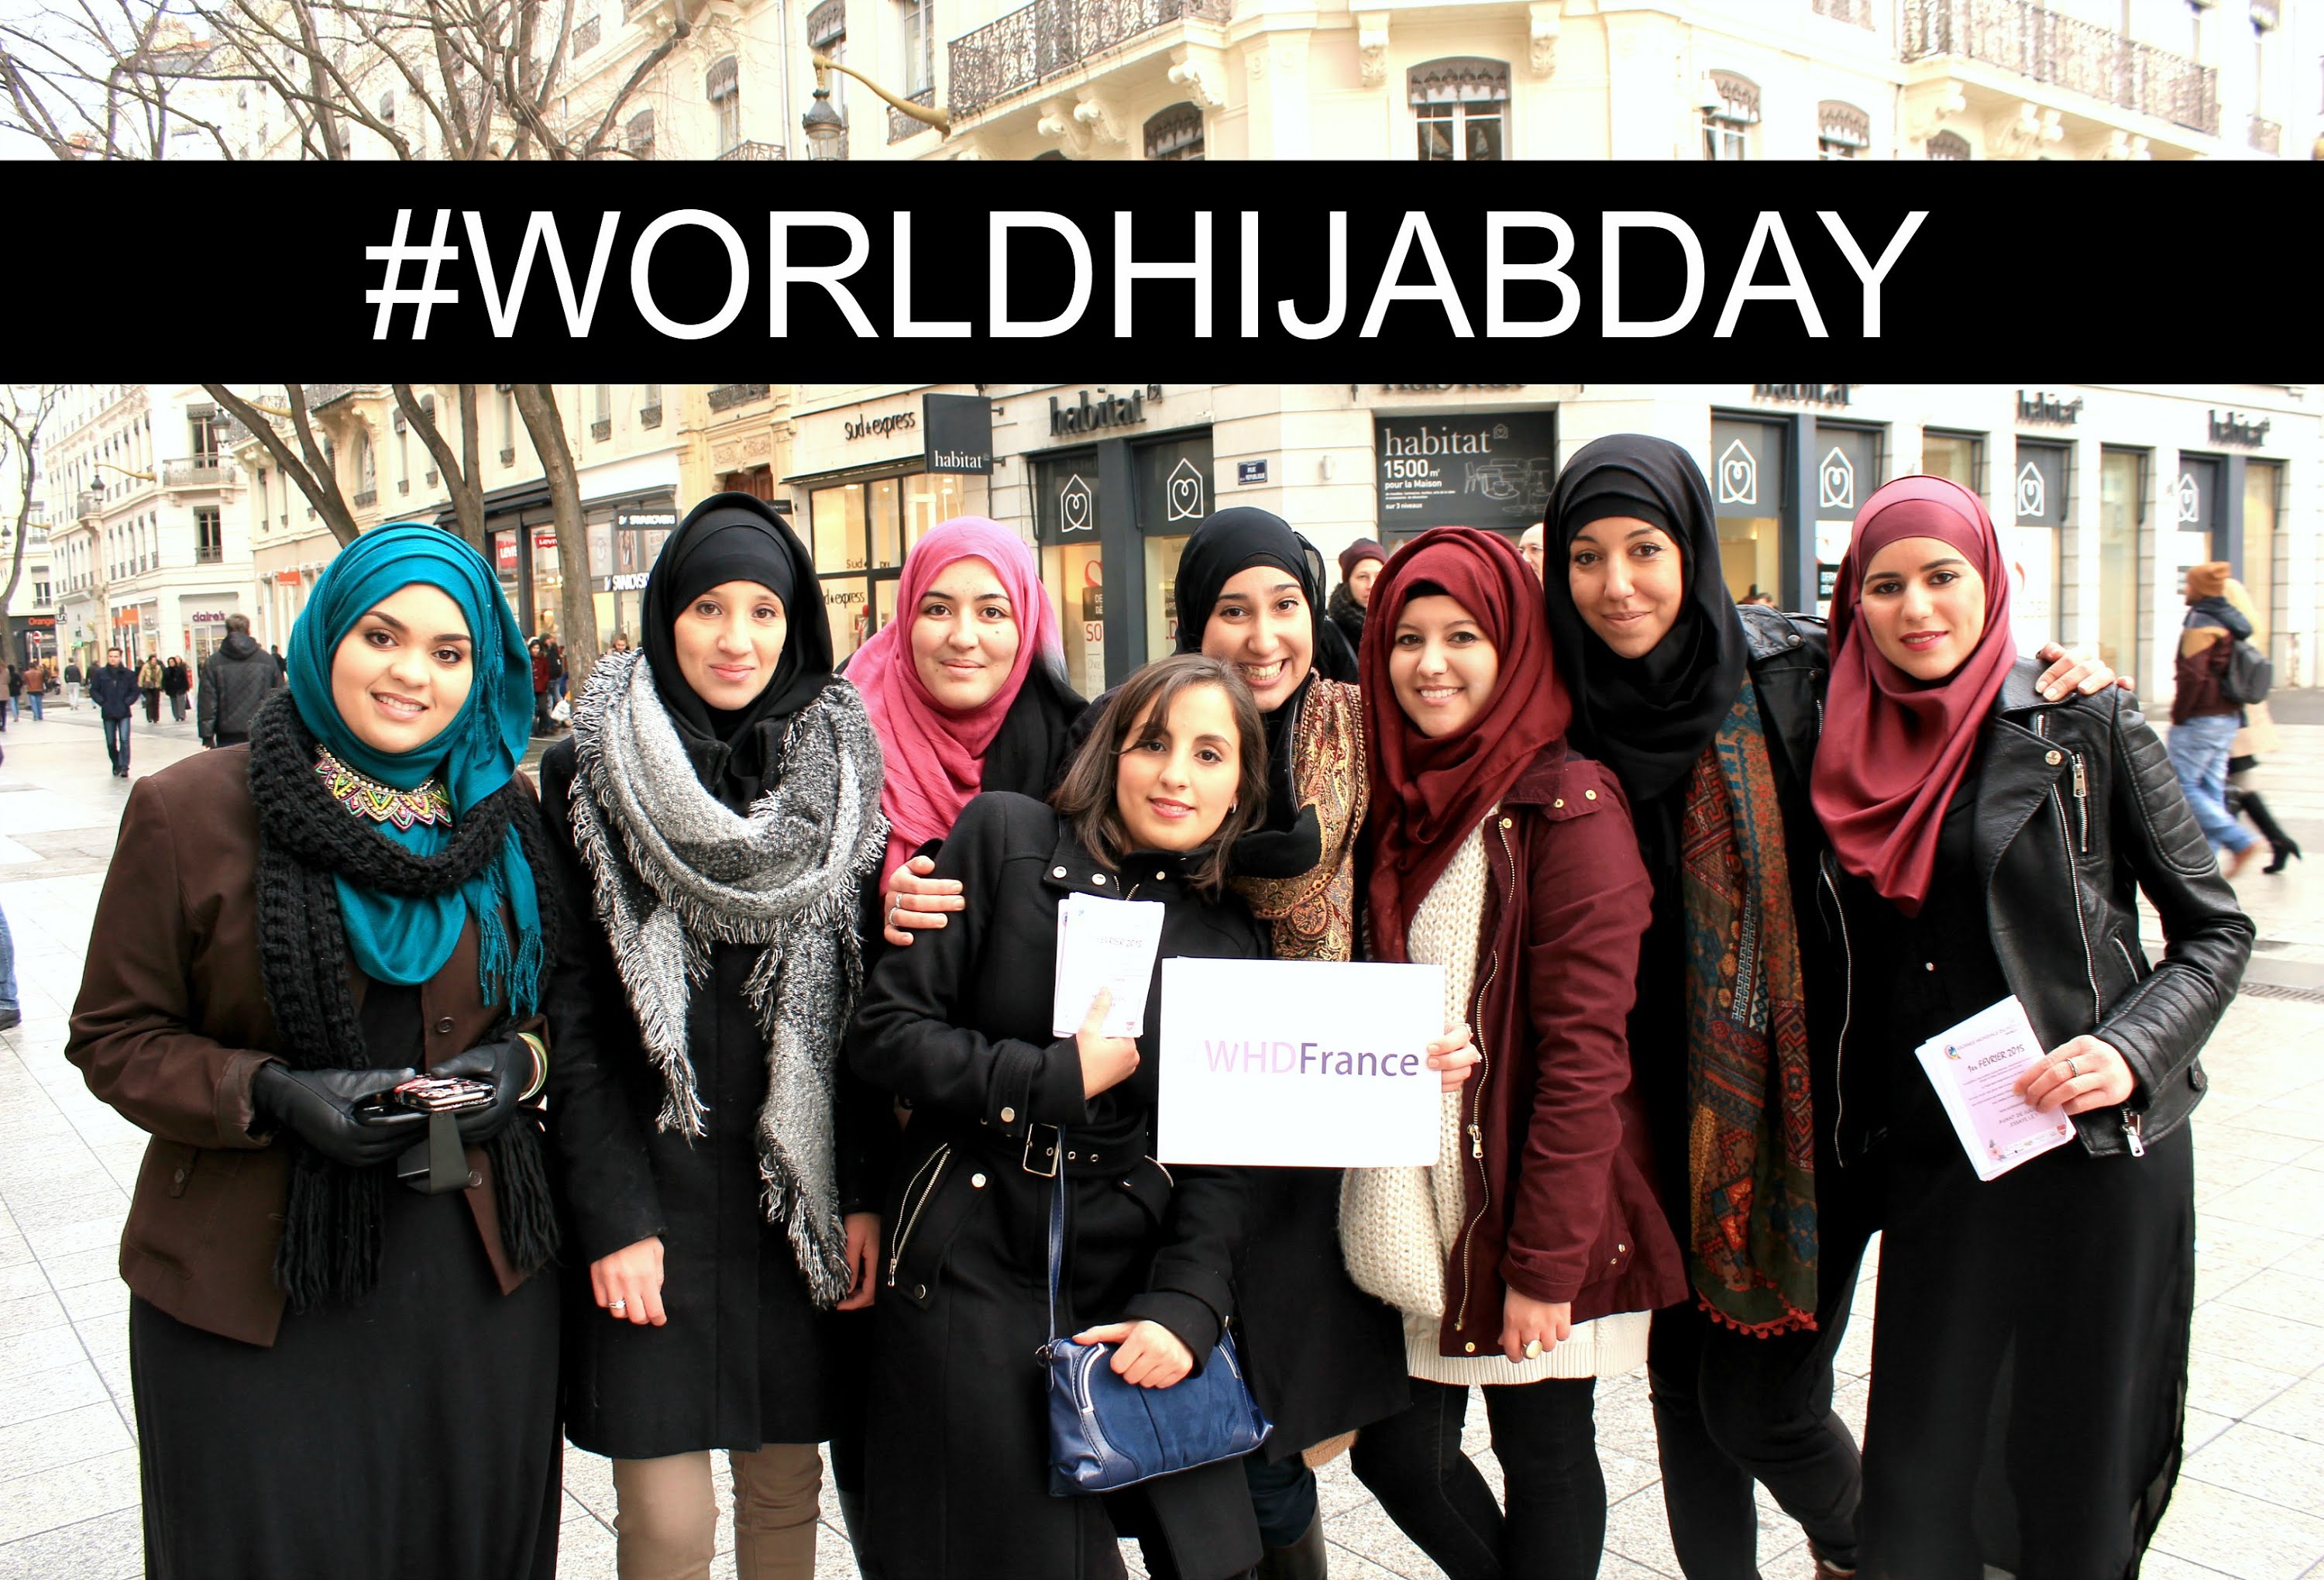 I Am A Woman And This Is Why I Am Against Celebrating The World Hijab Day